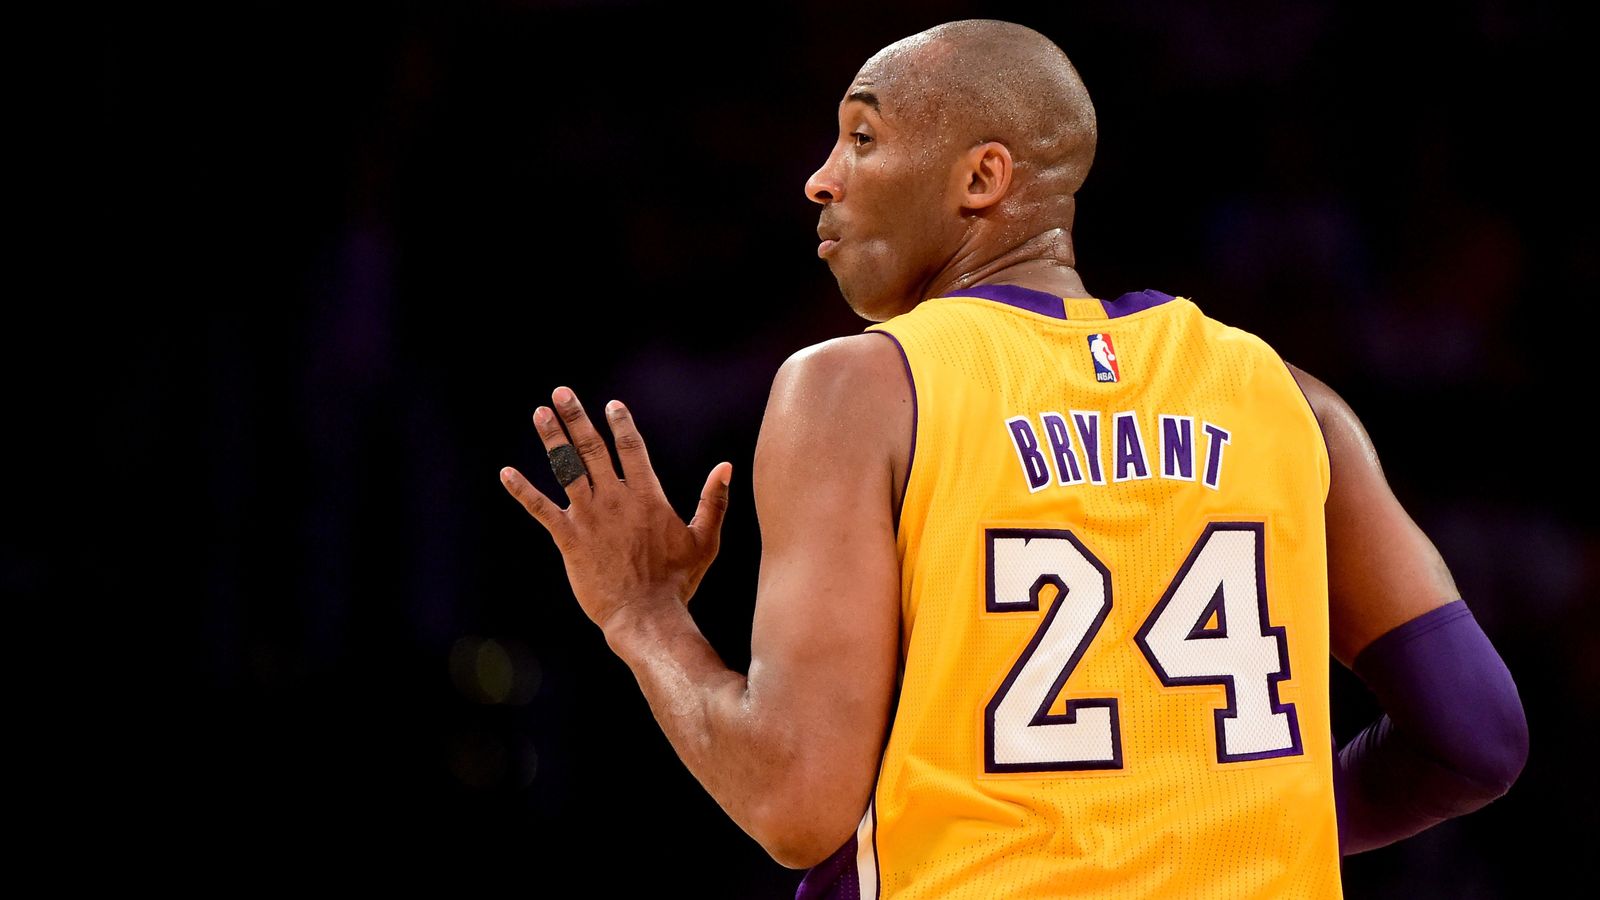 NBA All-Star Game players to wear Kobe Bryant's No. 24 and Gianna